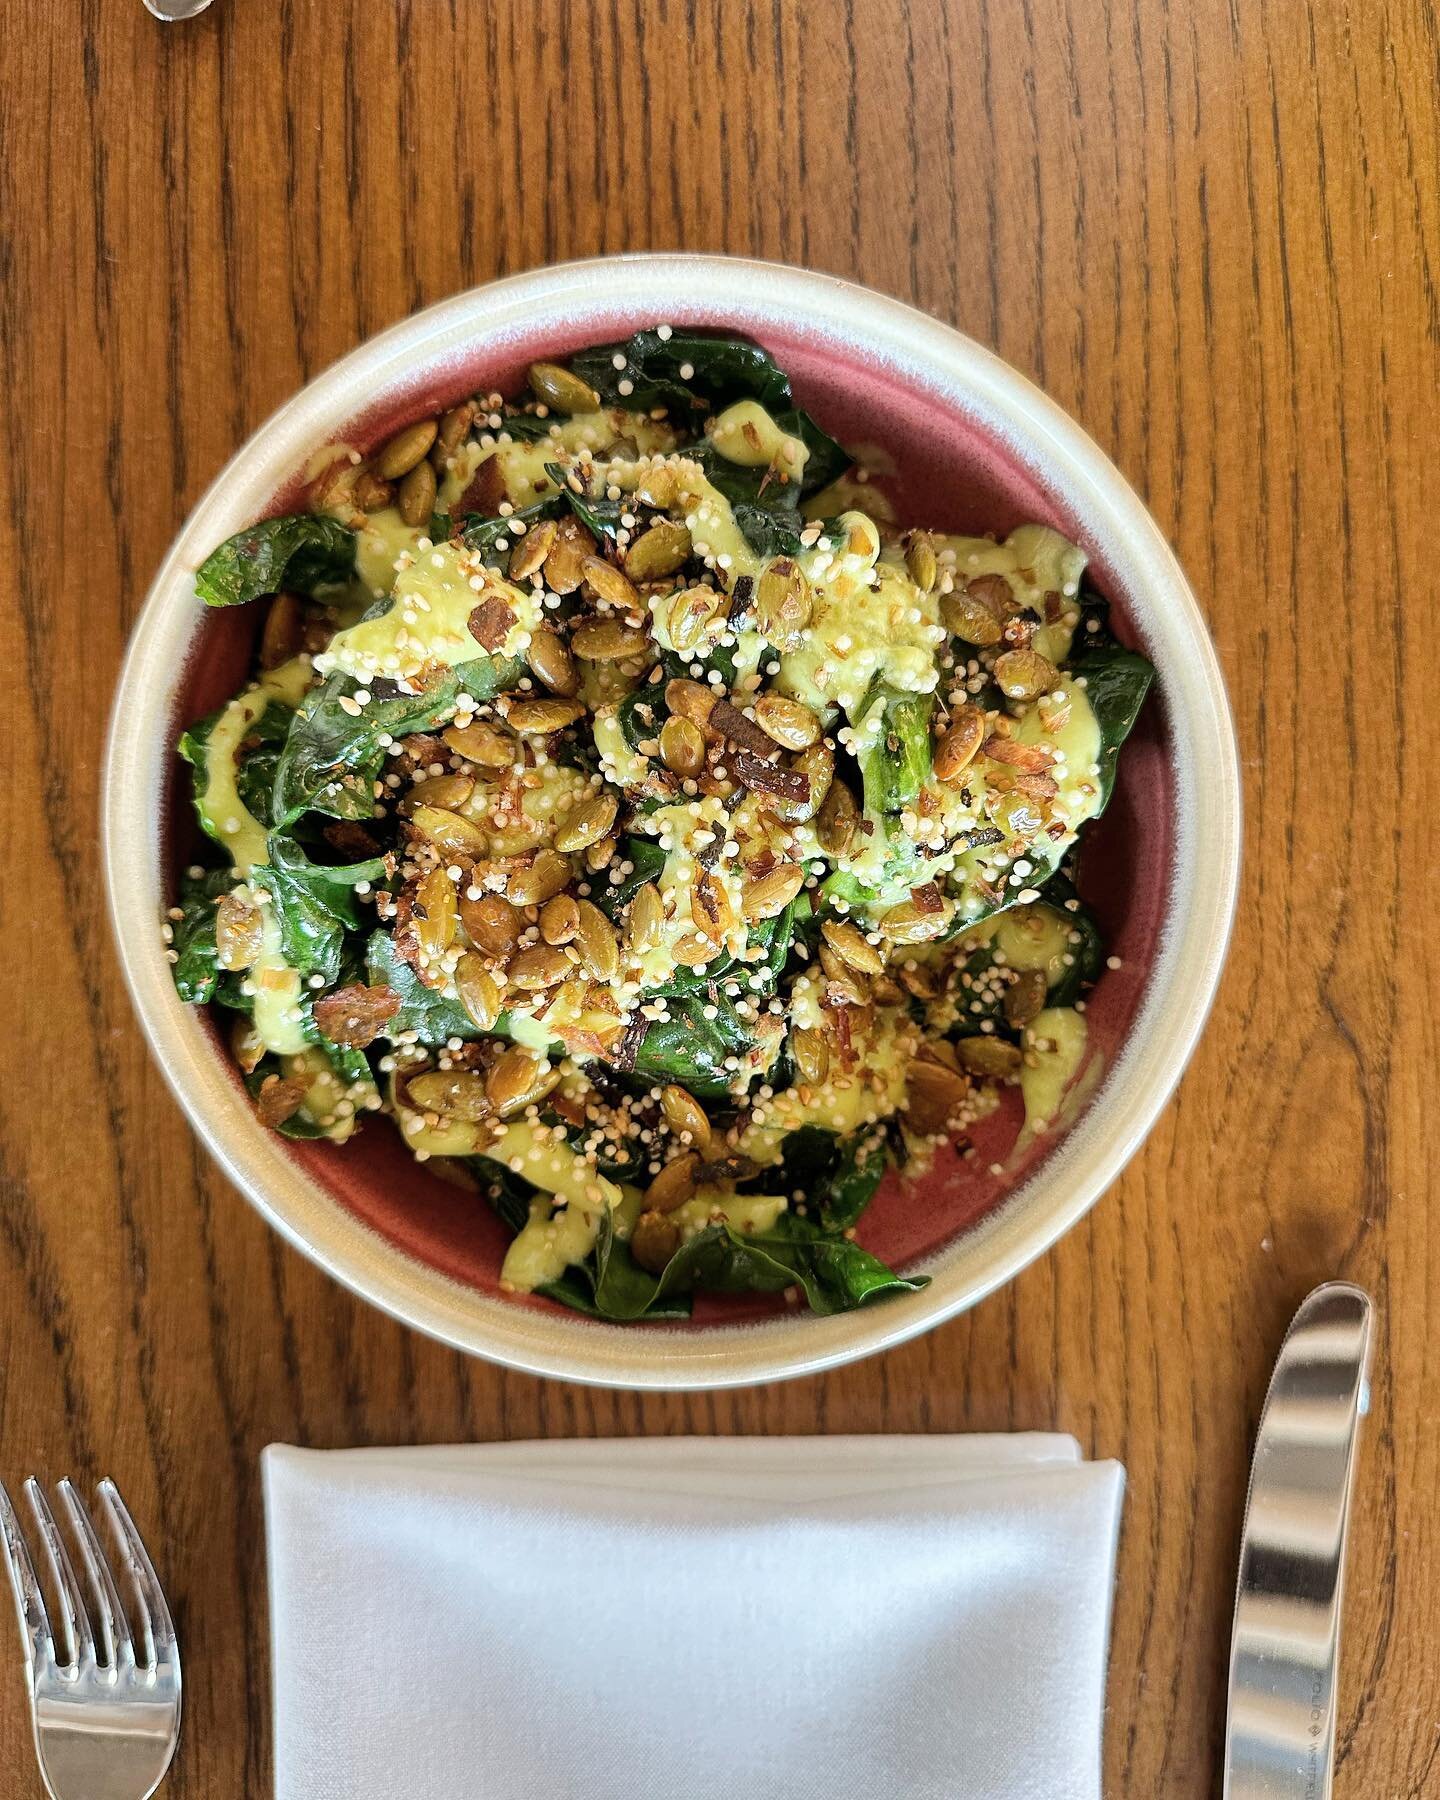 🚨New Vegetable Dish! For a limited time we&rsquo;ve got some of Thane Palmberg&rsquo;s iconic spinach! These hearty leafs are topped with an avocado dressing and pumpkin seed furikake! Simply amazing!